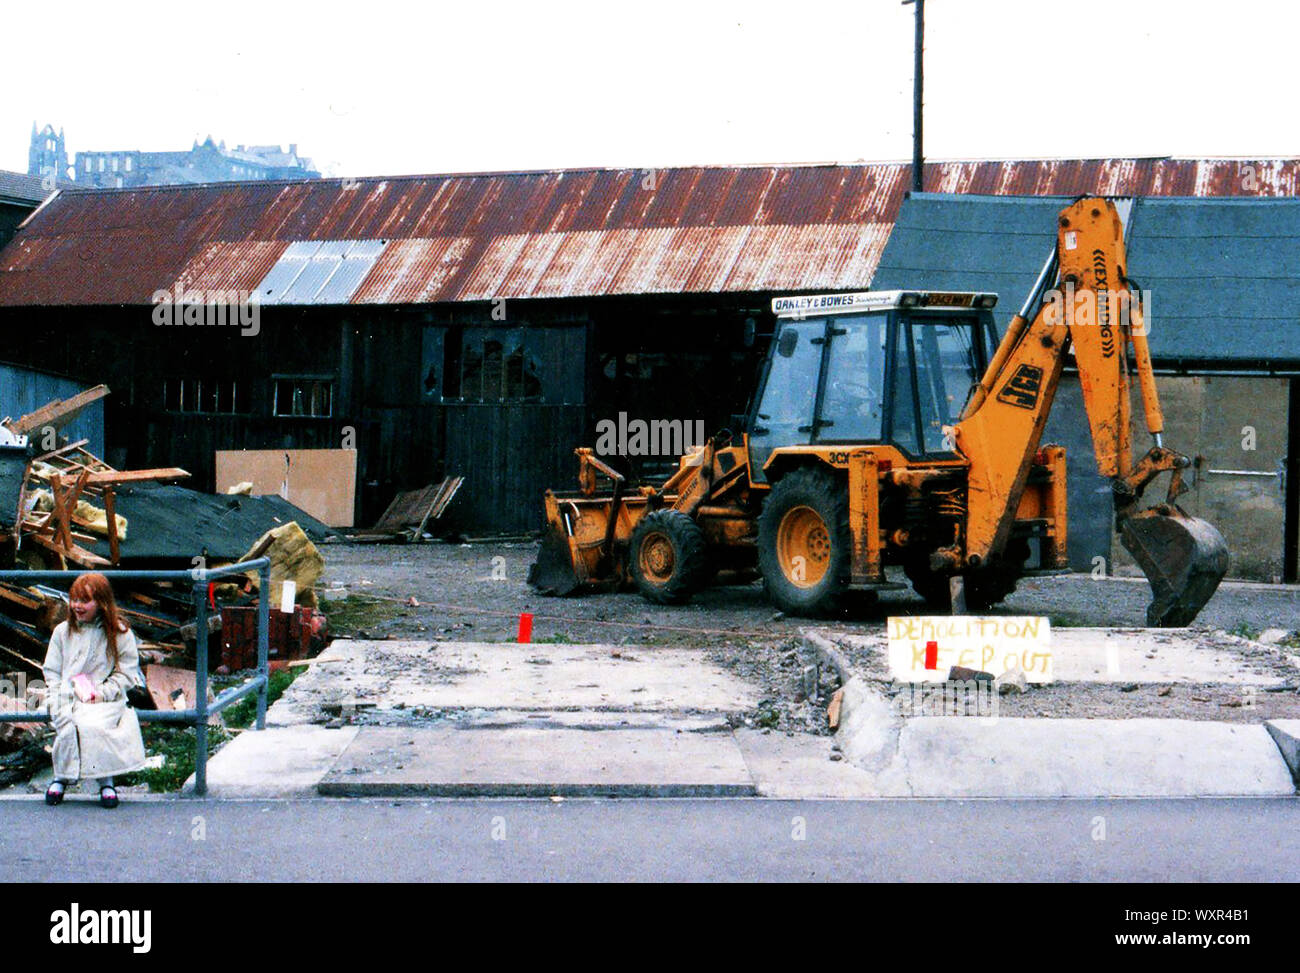 A photograph taken shortly before the demolition of Whitby Sawmill, Dock End, Whitby, Yorkshire UK by a Utemaster digger with extradig shovel.. The Dock End area was under redevelopment and is  now covered by the former tourist information office (Now the Star Inn Restaurant by the Harbour) and other facilities. Stock Photo